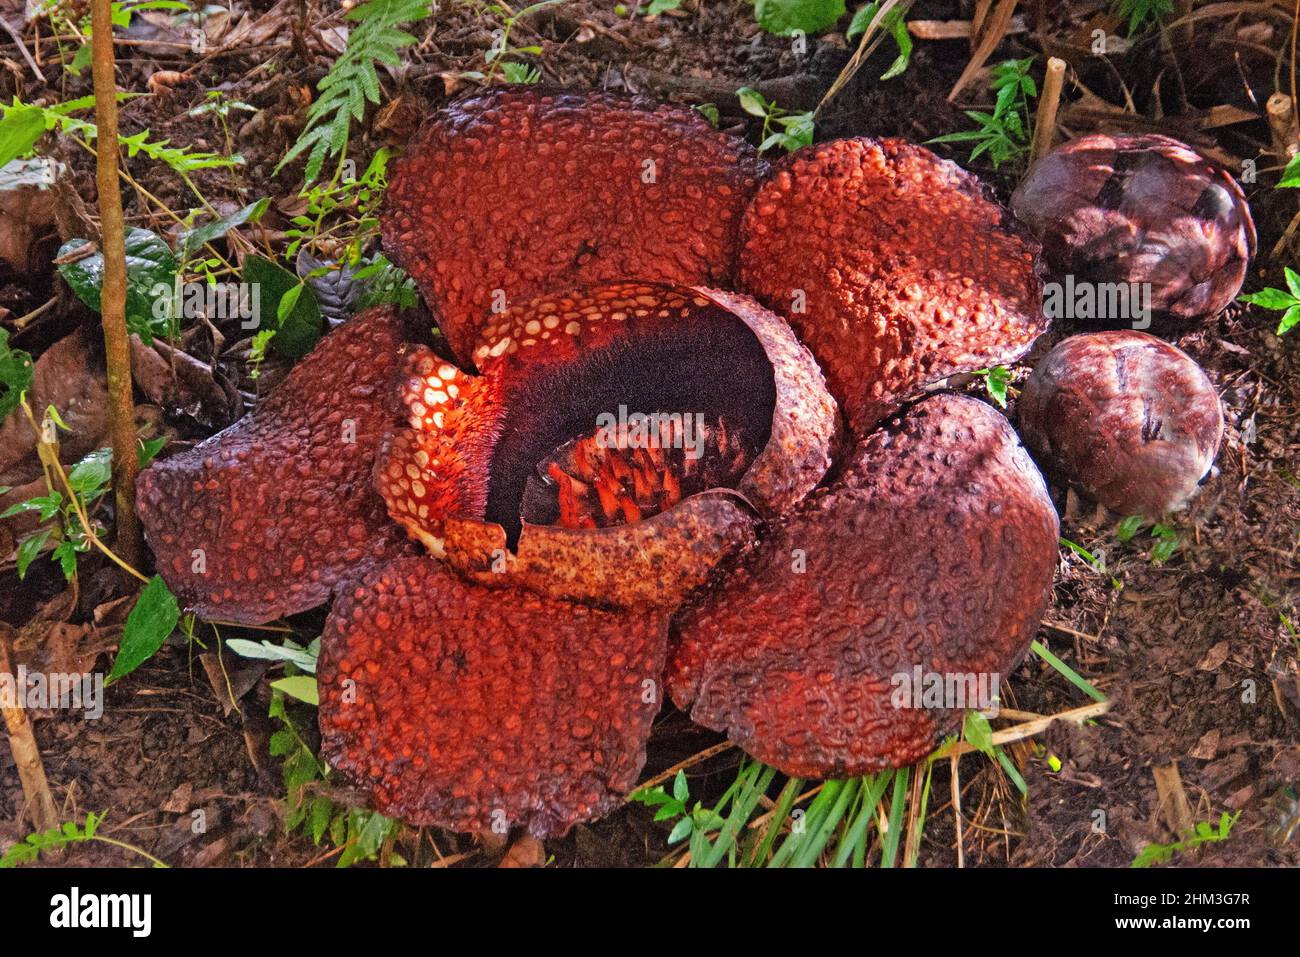 Rafflesia keithii is a parasitic plant endemic to Borneo. With flowers growing up to 1m in diameter, it is one of the biggest flowers in the World. Stock Photo